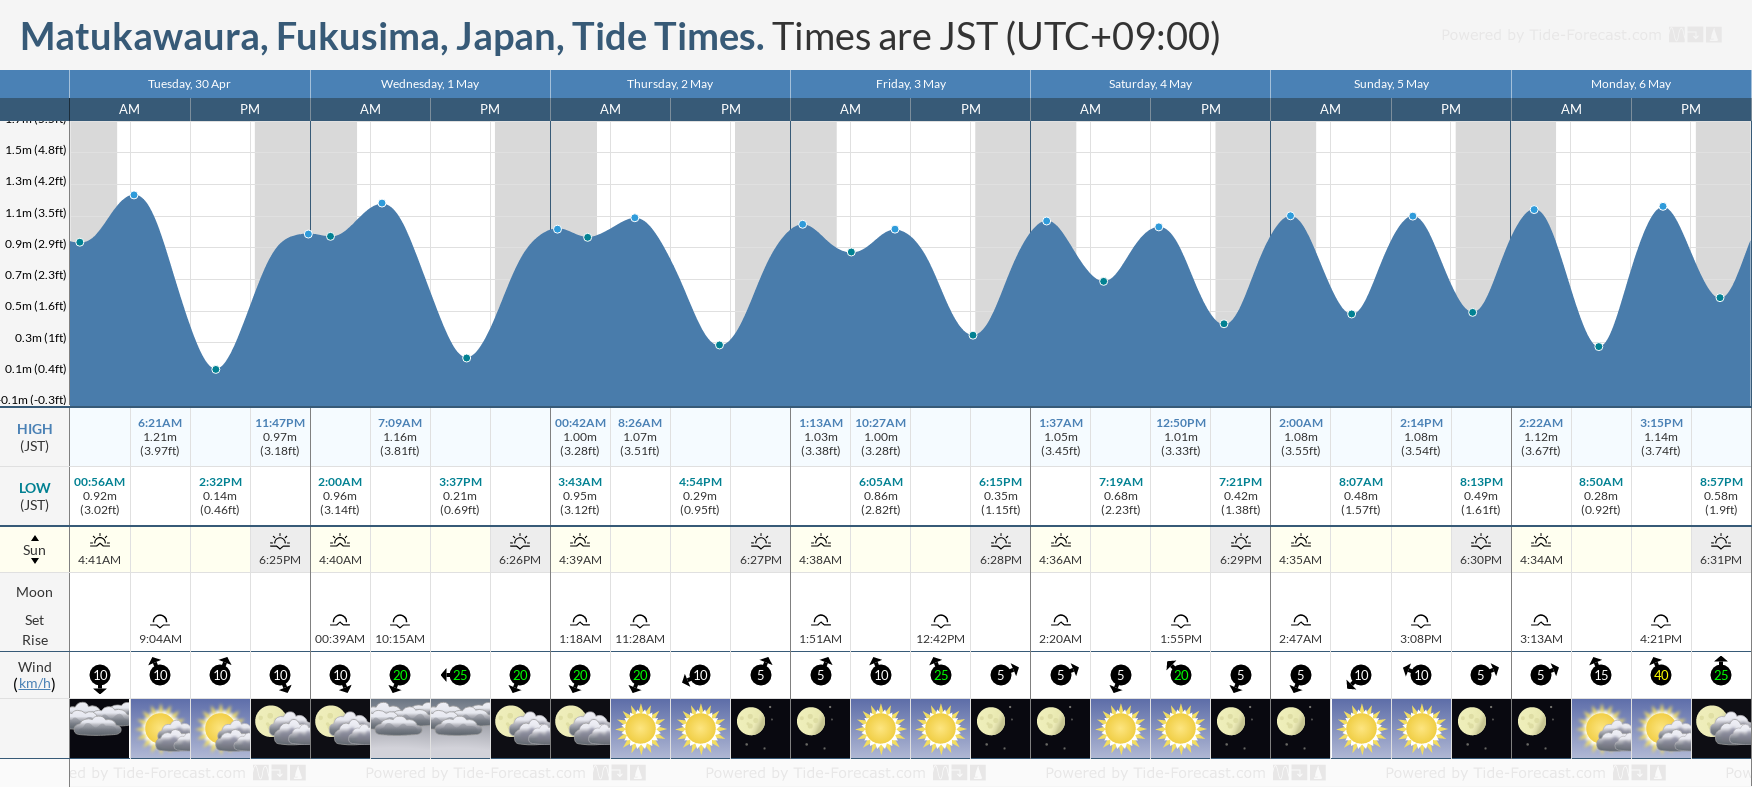 Matukawaura, Fukusima, Japan Tide Chart including high and low tide tide times for the next 7 days